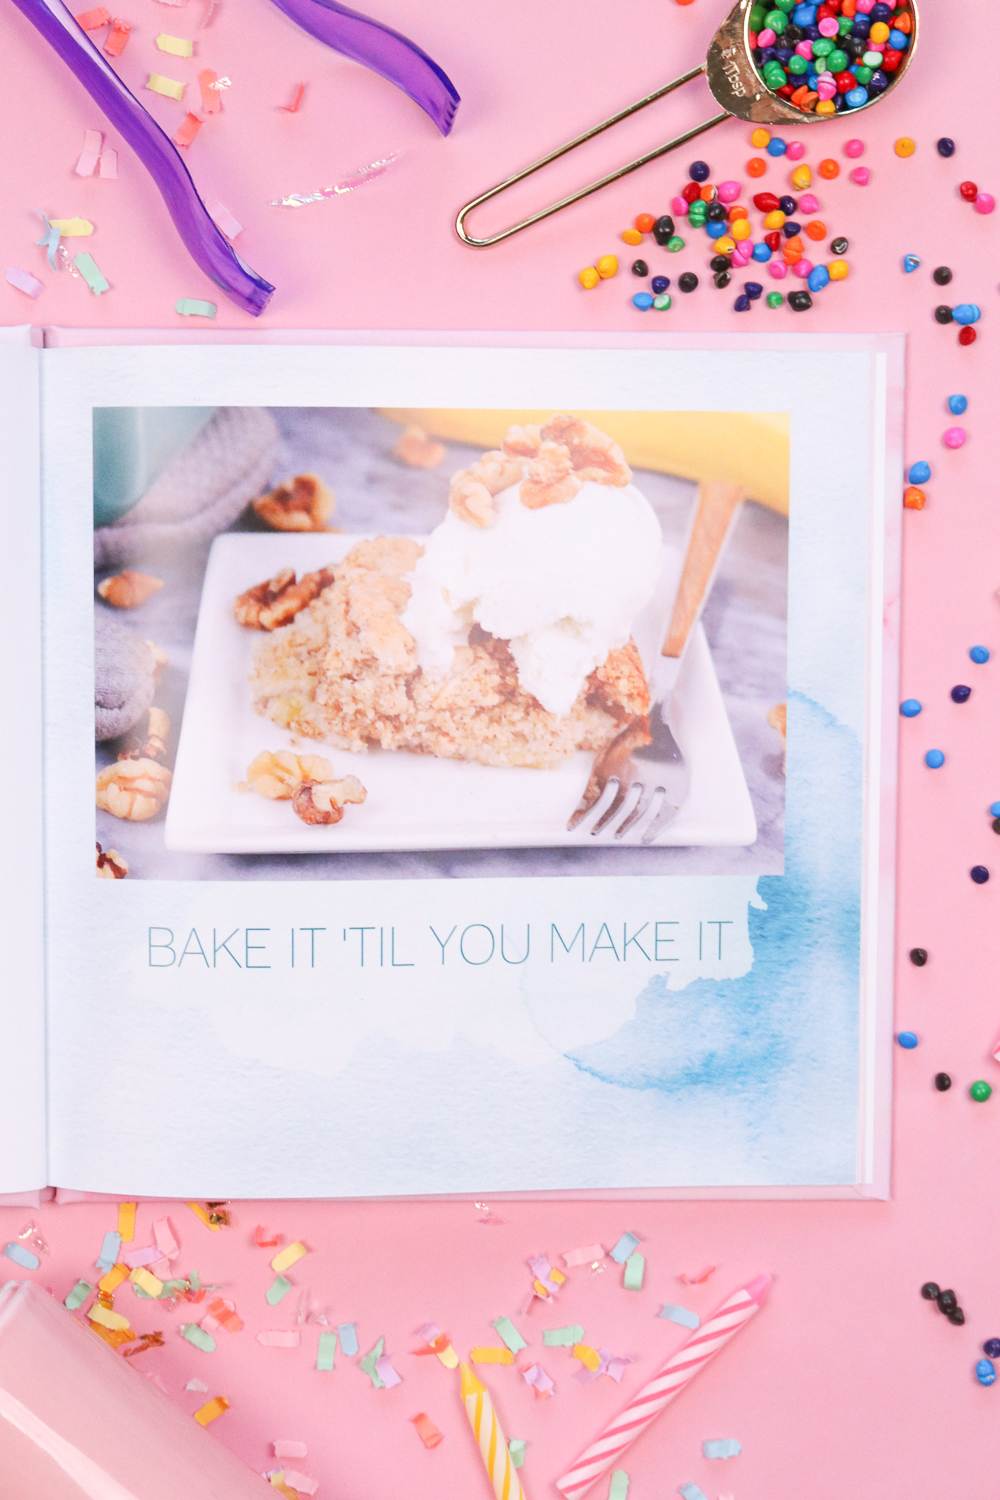 How to Make your Own Recipe Book | Club Crafted